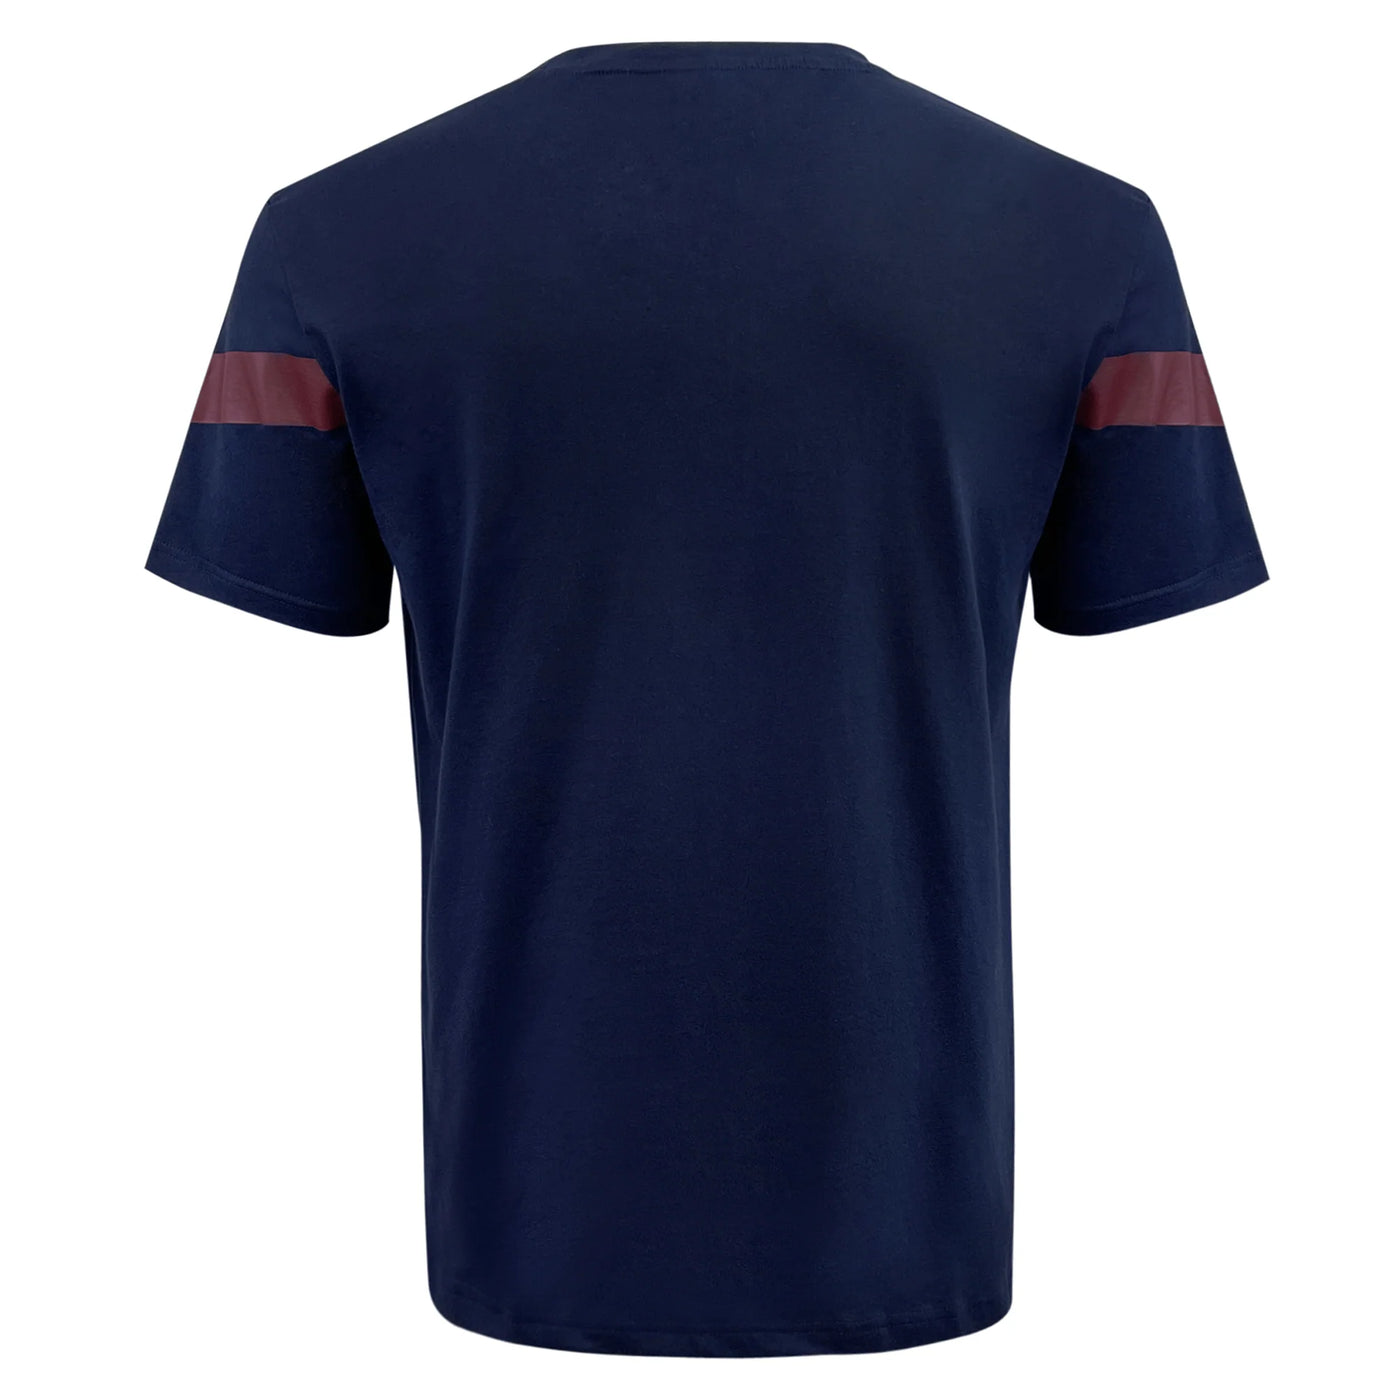 Highlanders Super Rugby Supporters T-Shirt Heren